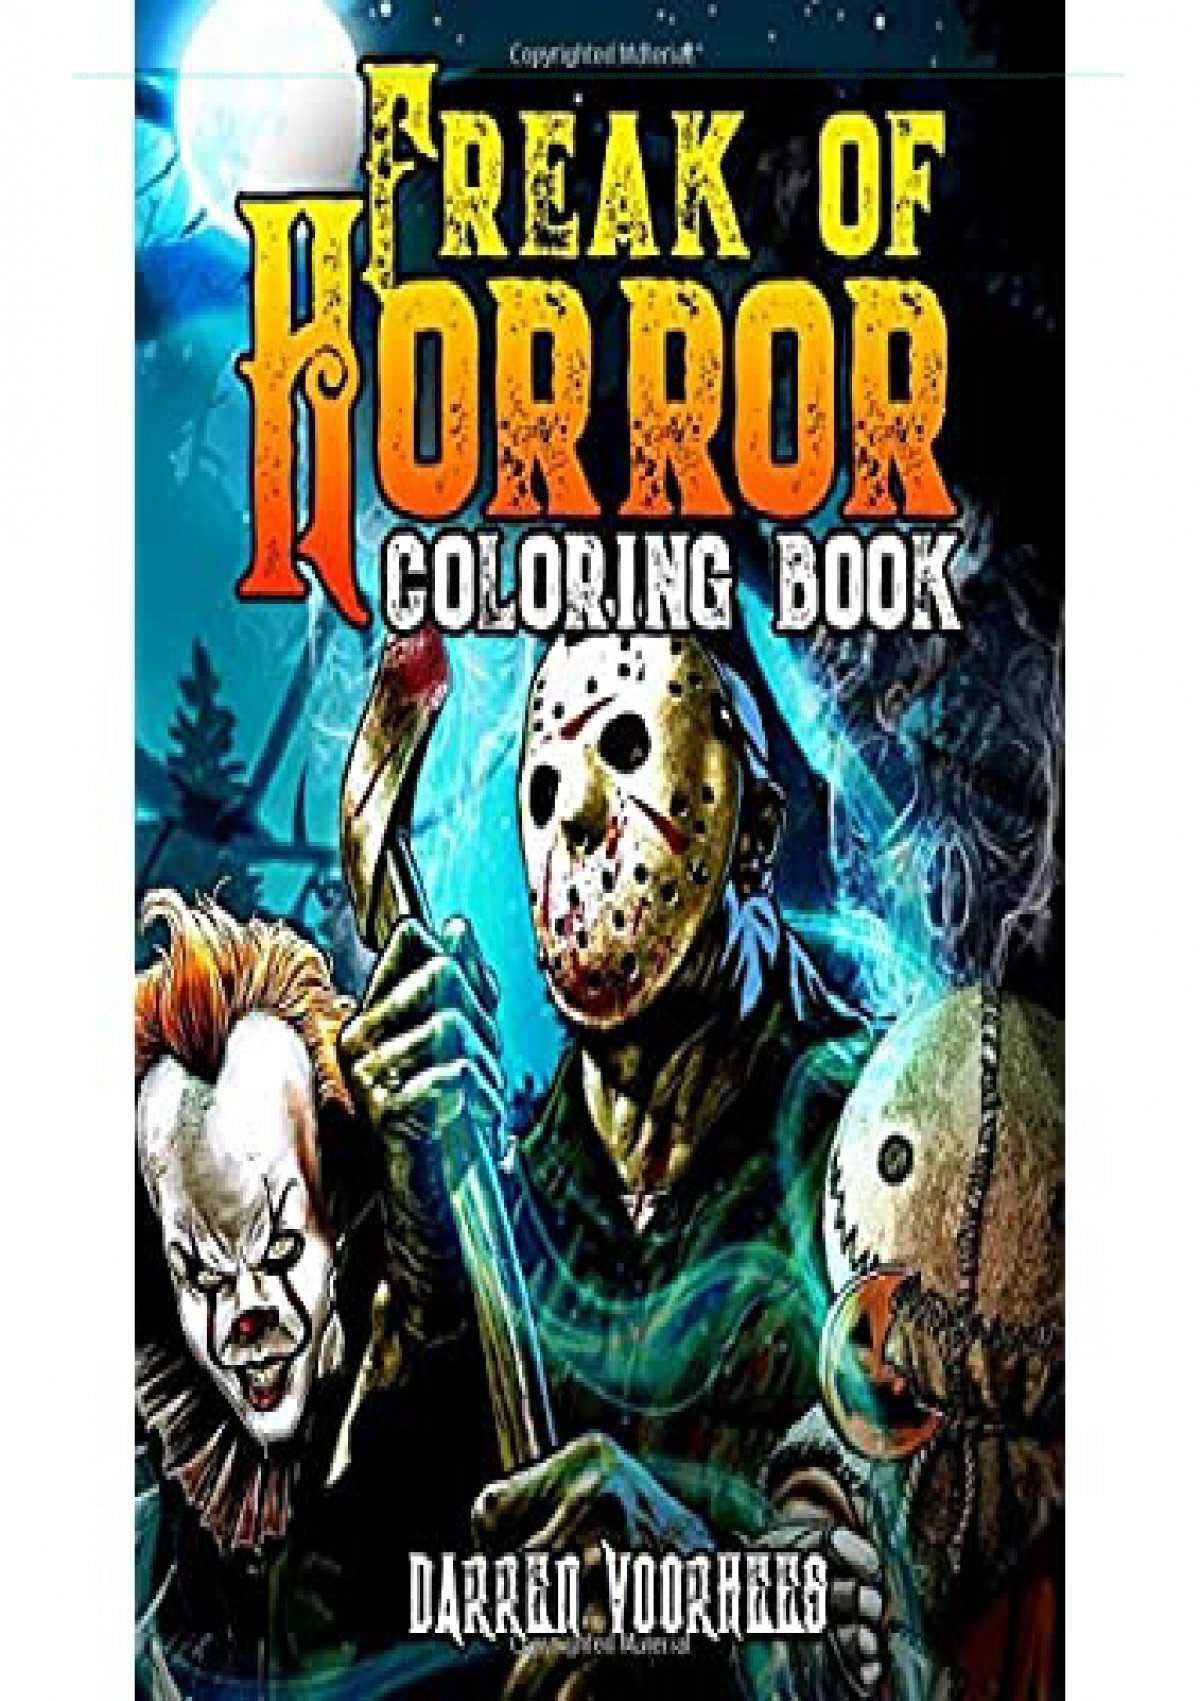 Download Pdf Download Freak Of Horror Coloring Book Scary Creatures And Creepy Serial Killers From Classic Horror Movies Halloween Holiday Gifts For Adults Kids